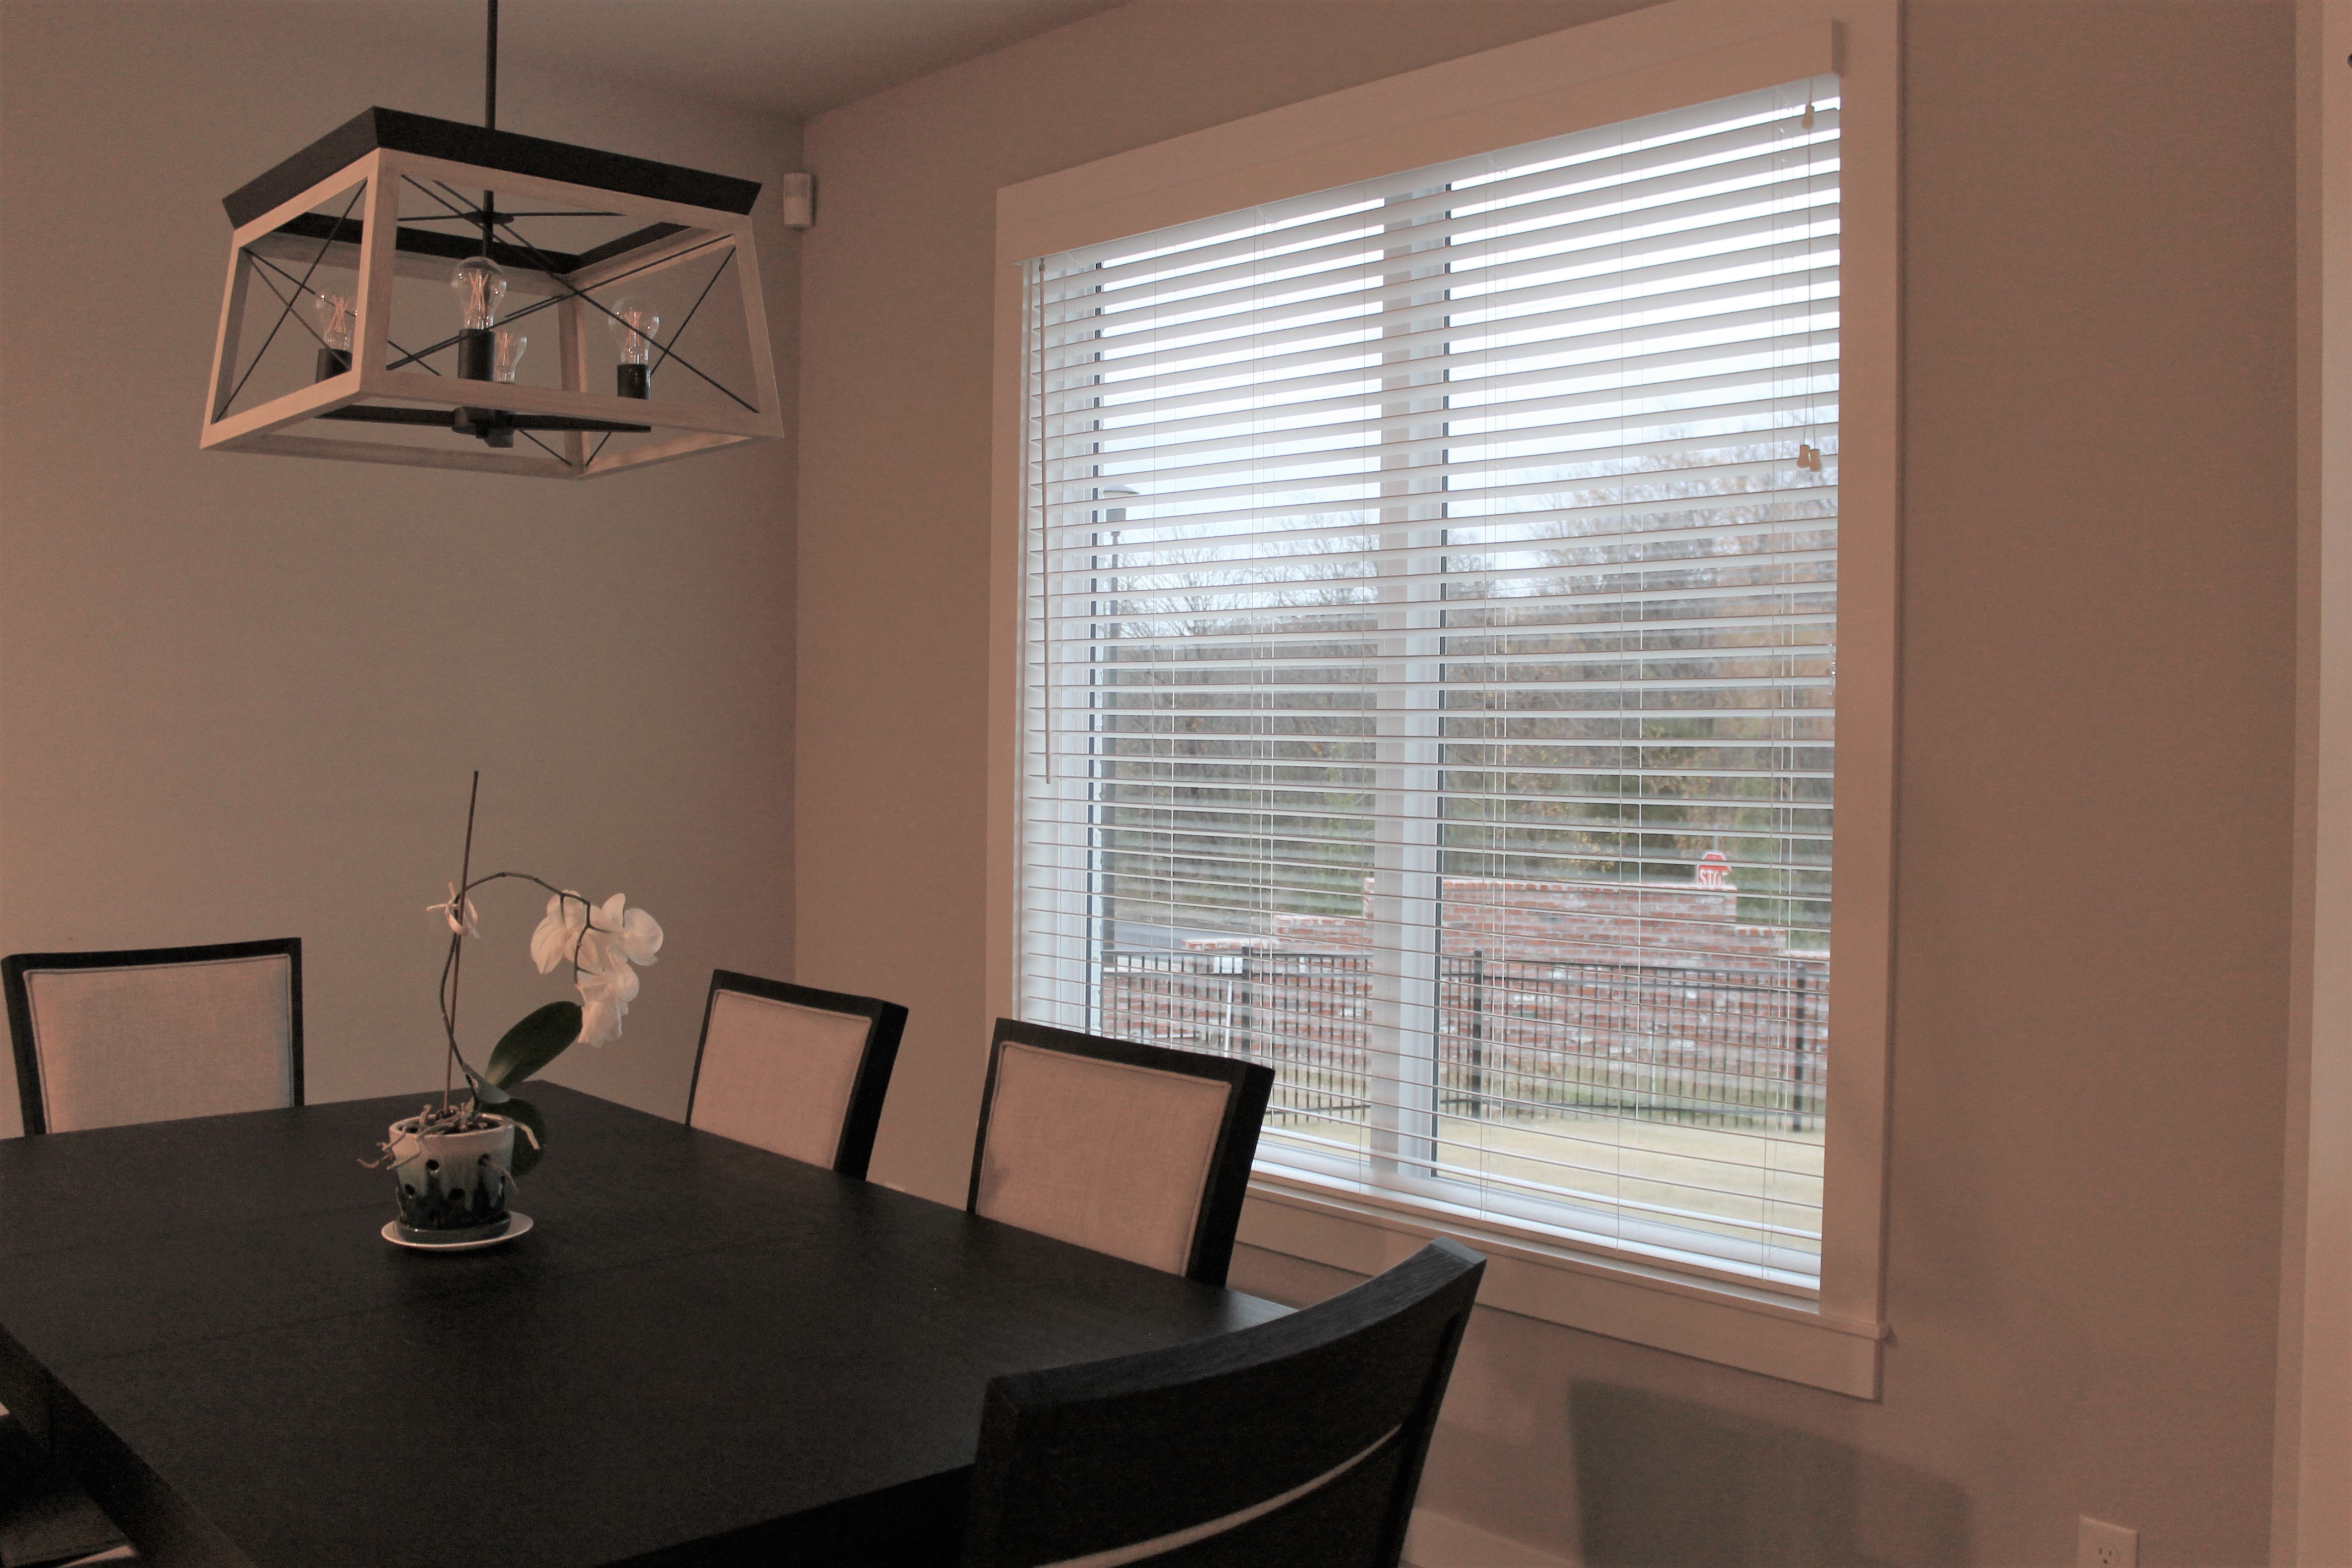 From the top of the line to more affordable builder-grade options, Budget Blinds of Owasso is here to help you with your window treatment needs! These Faux wood blinds provide privacy and they are a great light filtering option as well. Call us at (918) 376-3503 for your free in-home consultation